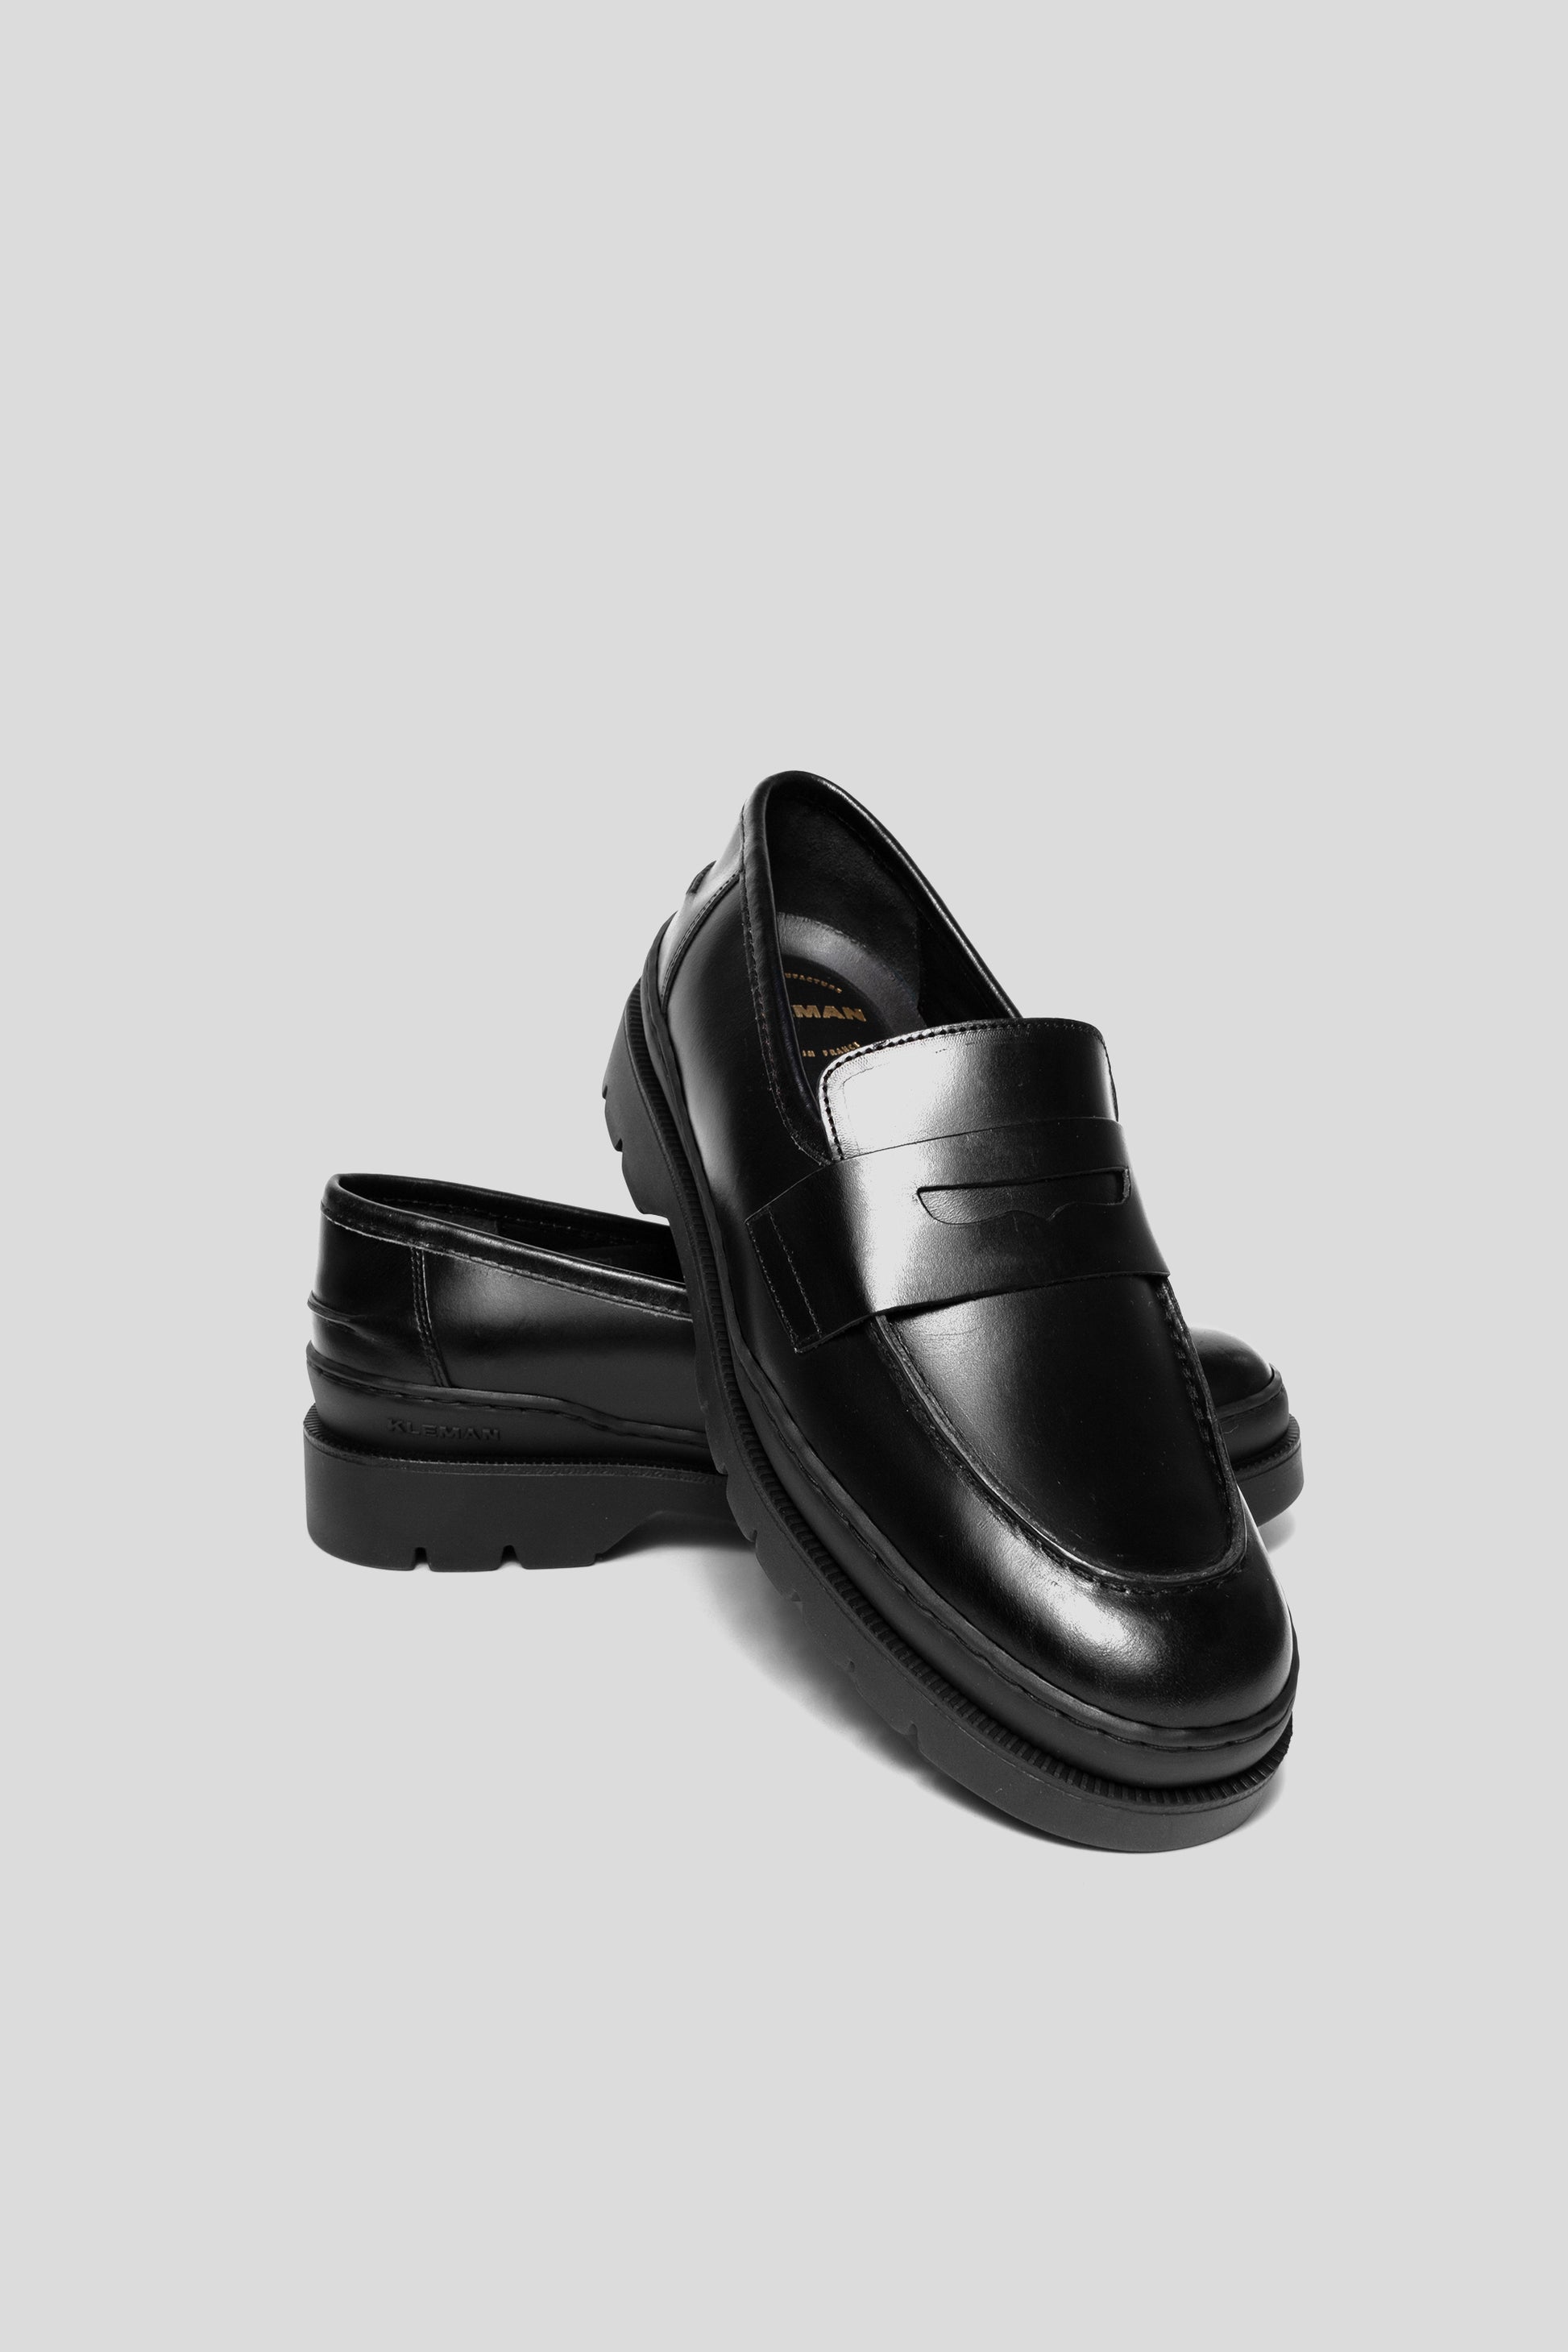 Women's Kleman A ccore M VGT Loafer in Black